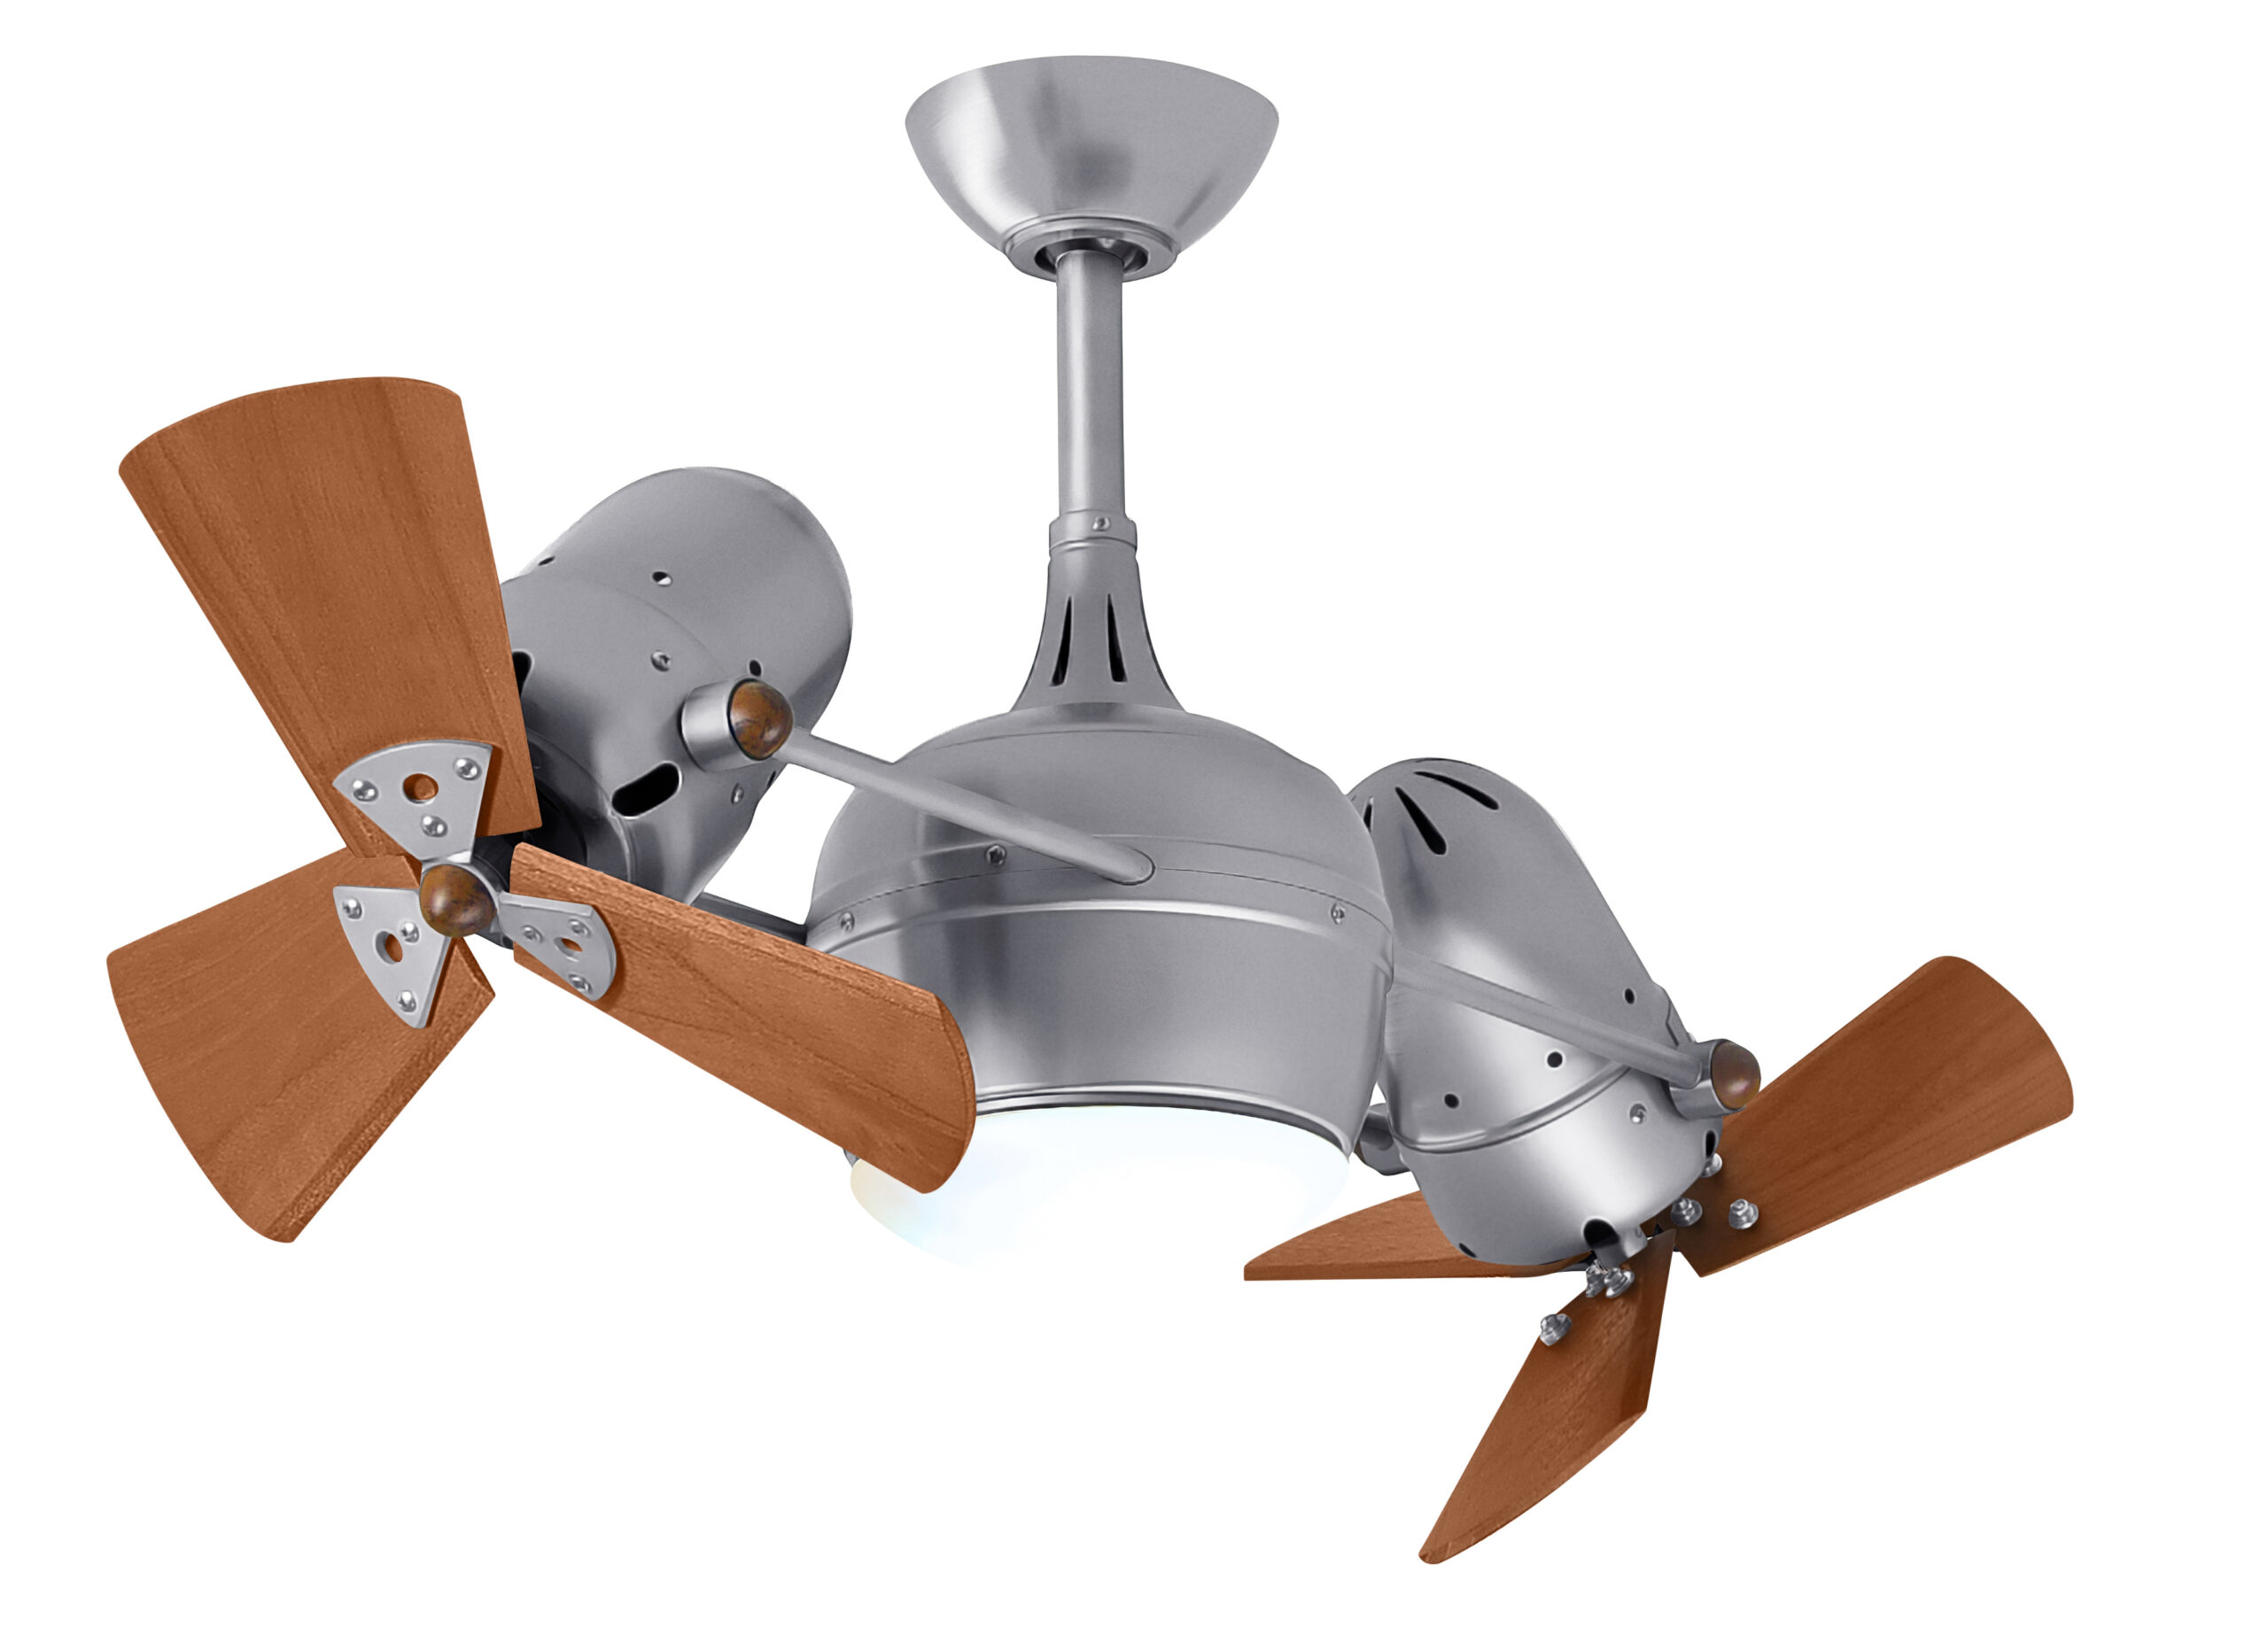 Dagny-LK rotational ceiling fan in Brushed Nickel with mahogany wood blades made by Matthews Fan Company.